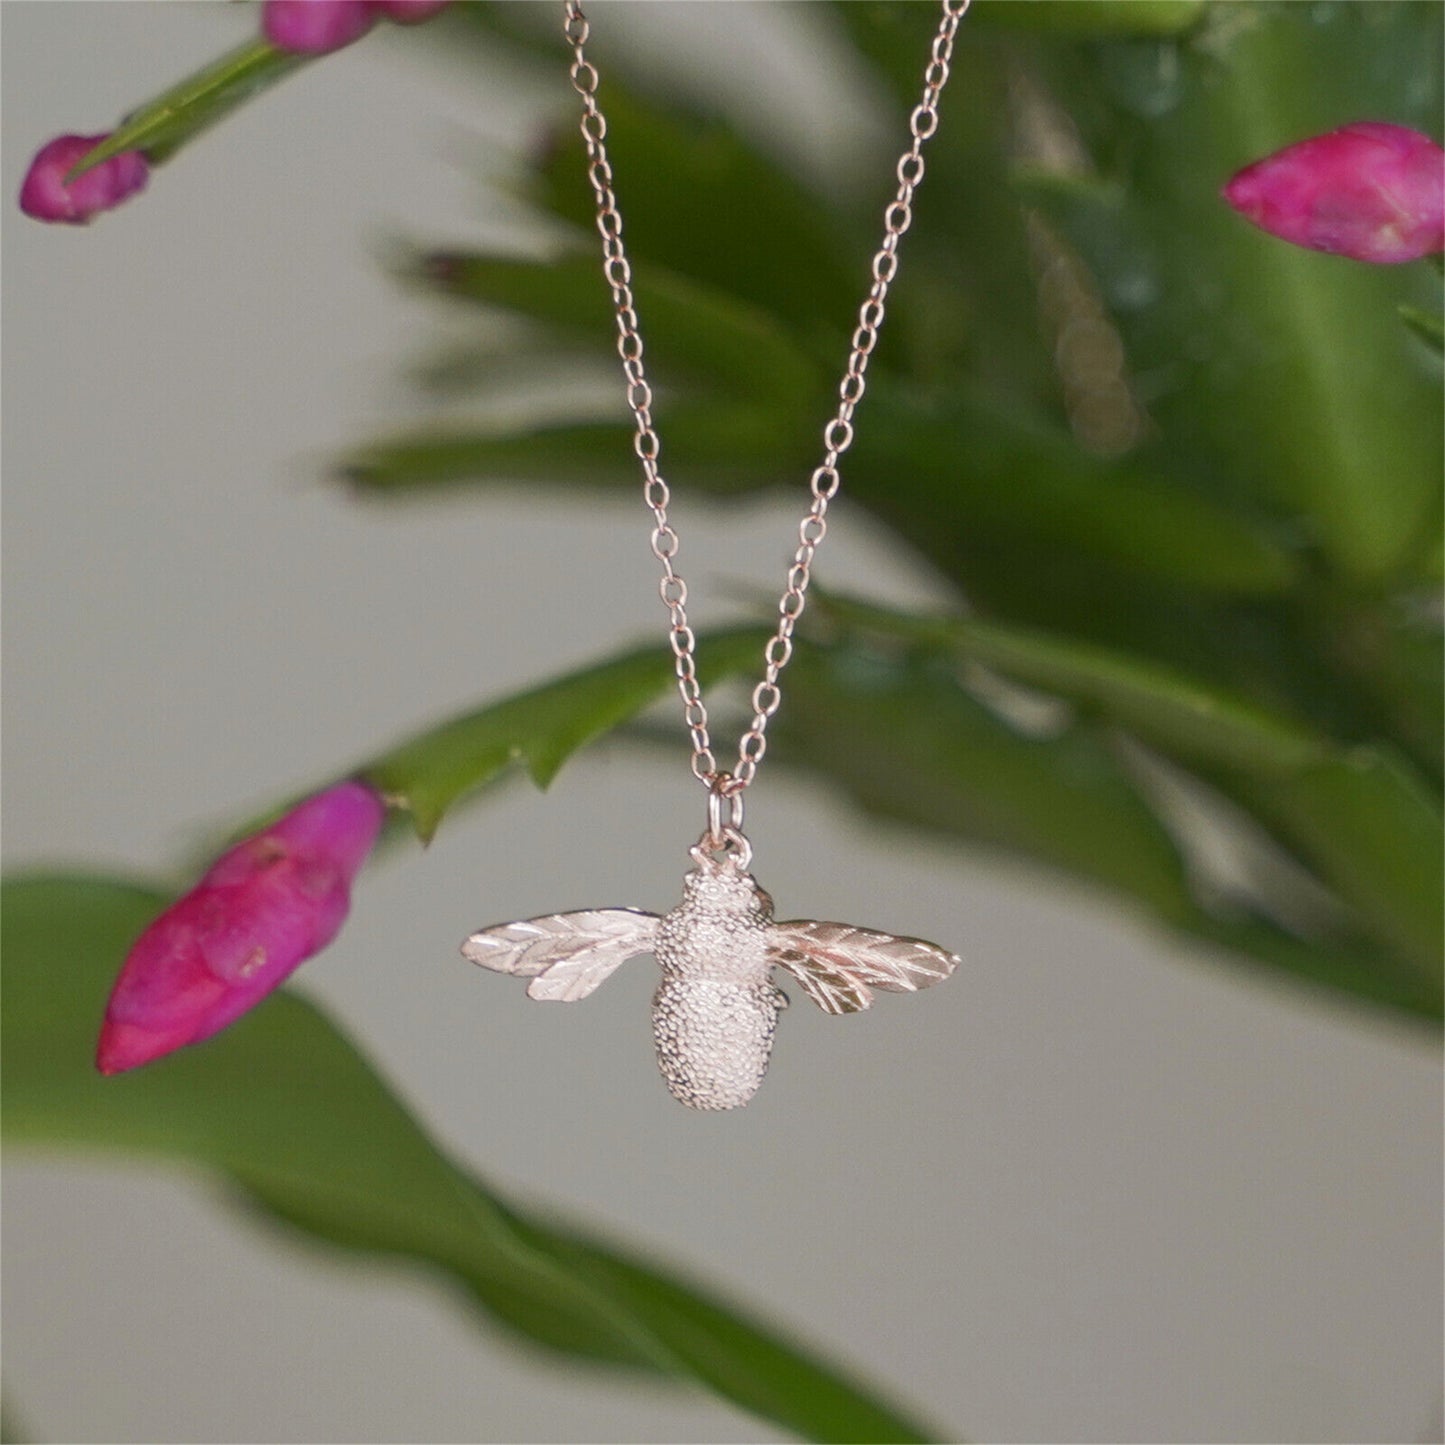 Sterling Silver Bumble Queen Bee Insect Pendant Necklace 3 Tones - sugarkittenlondon